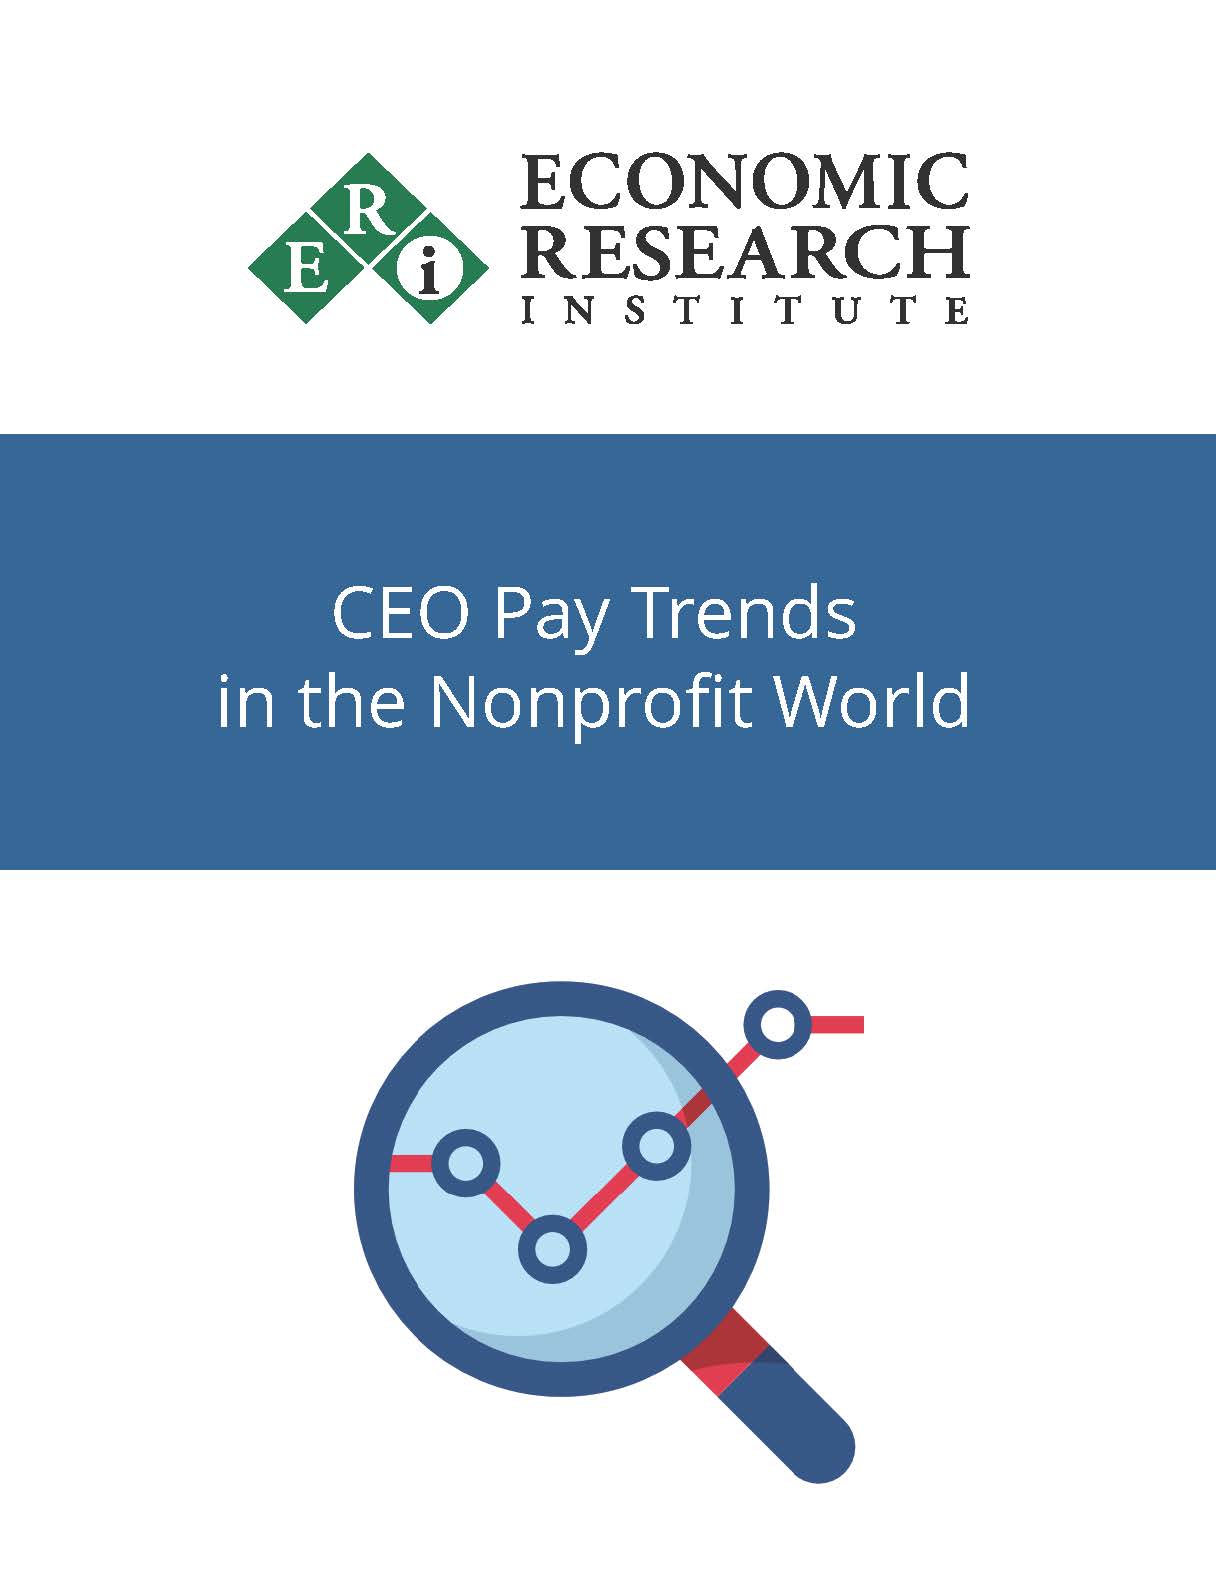 CEO Pay Trends in the Nonprofit World 2018_Page_1